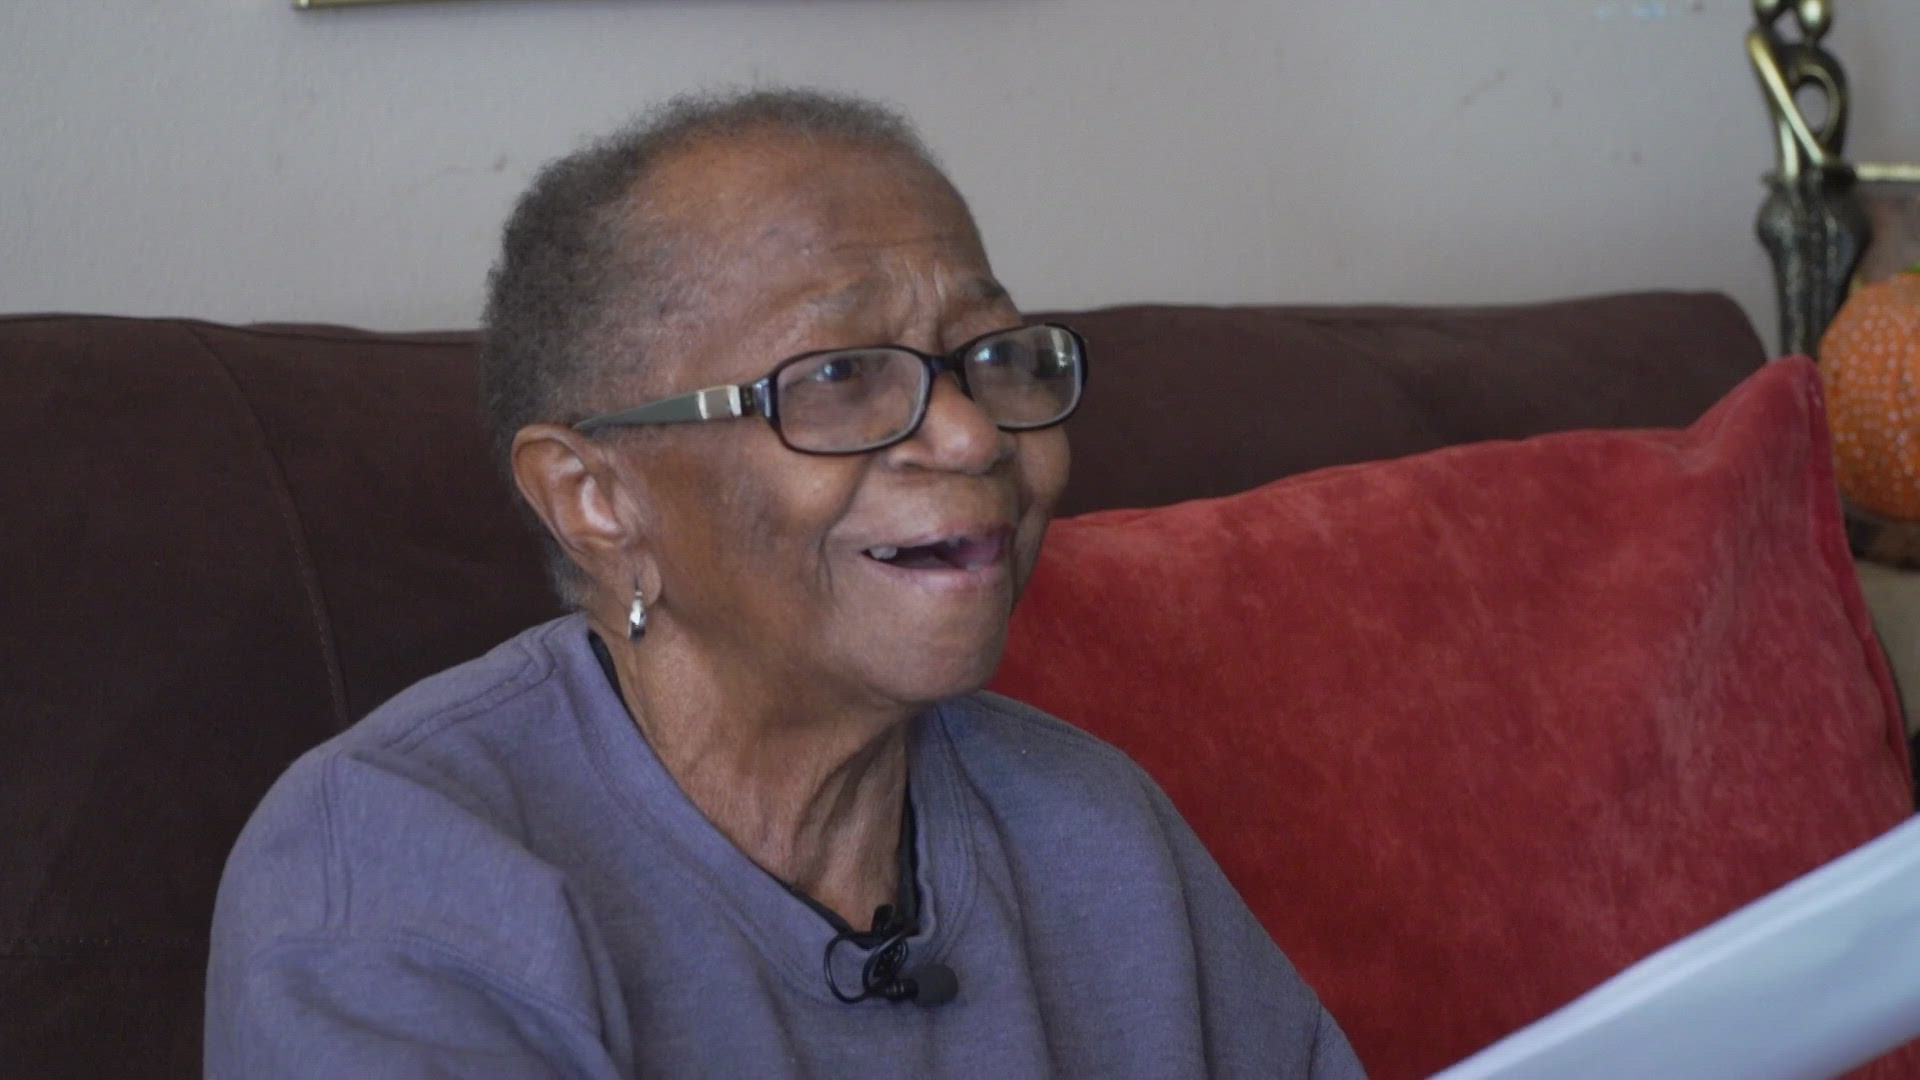 After a story aired about a woman who got high utility bills, the community stepped up to pay them off.